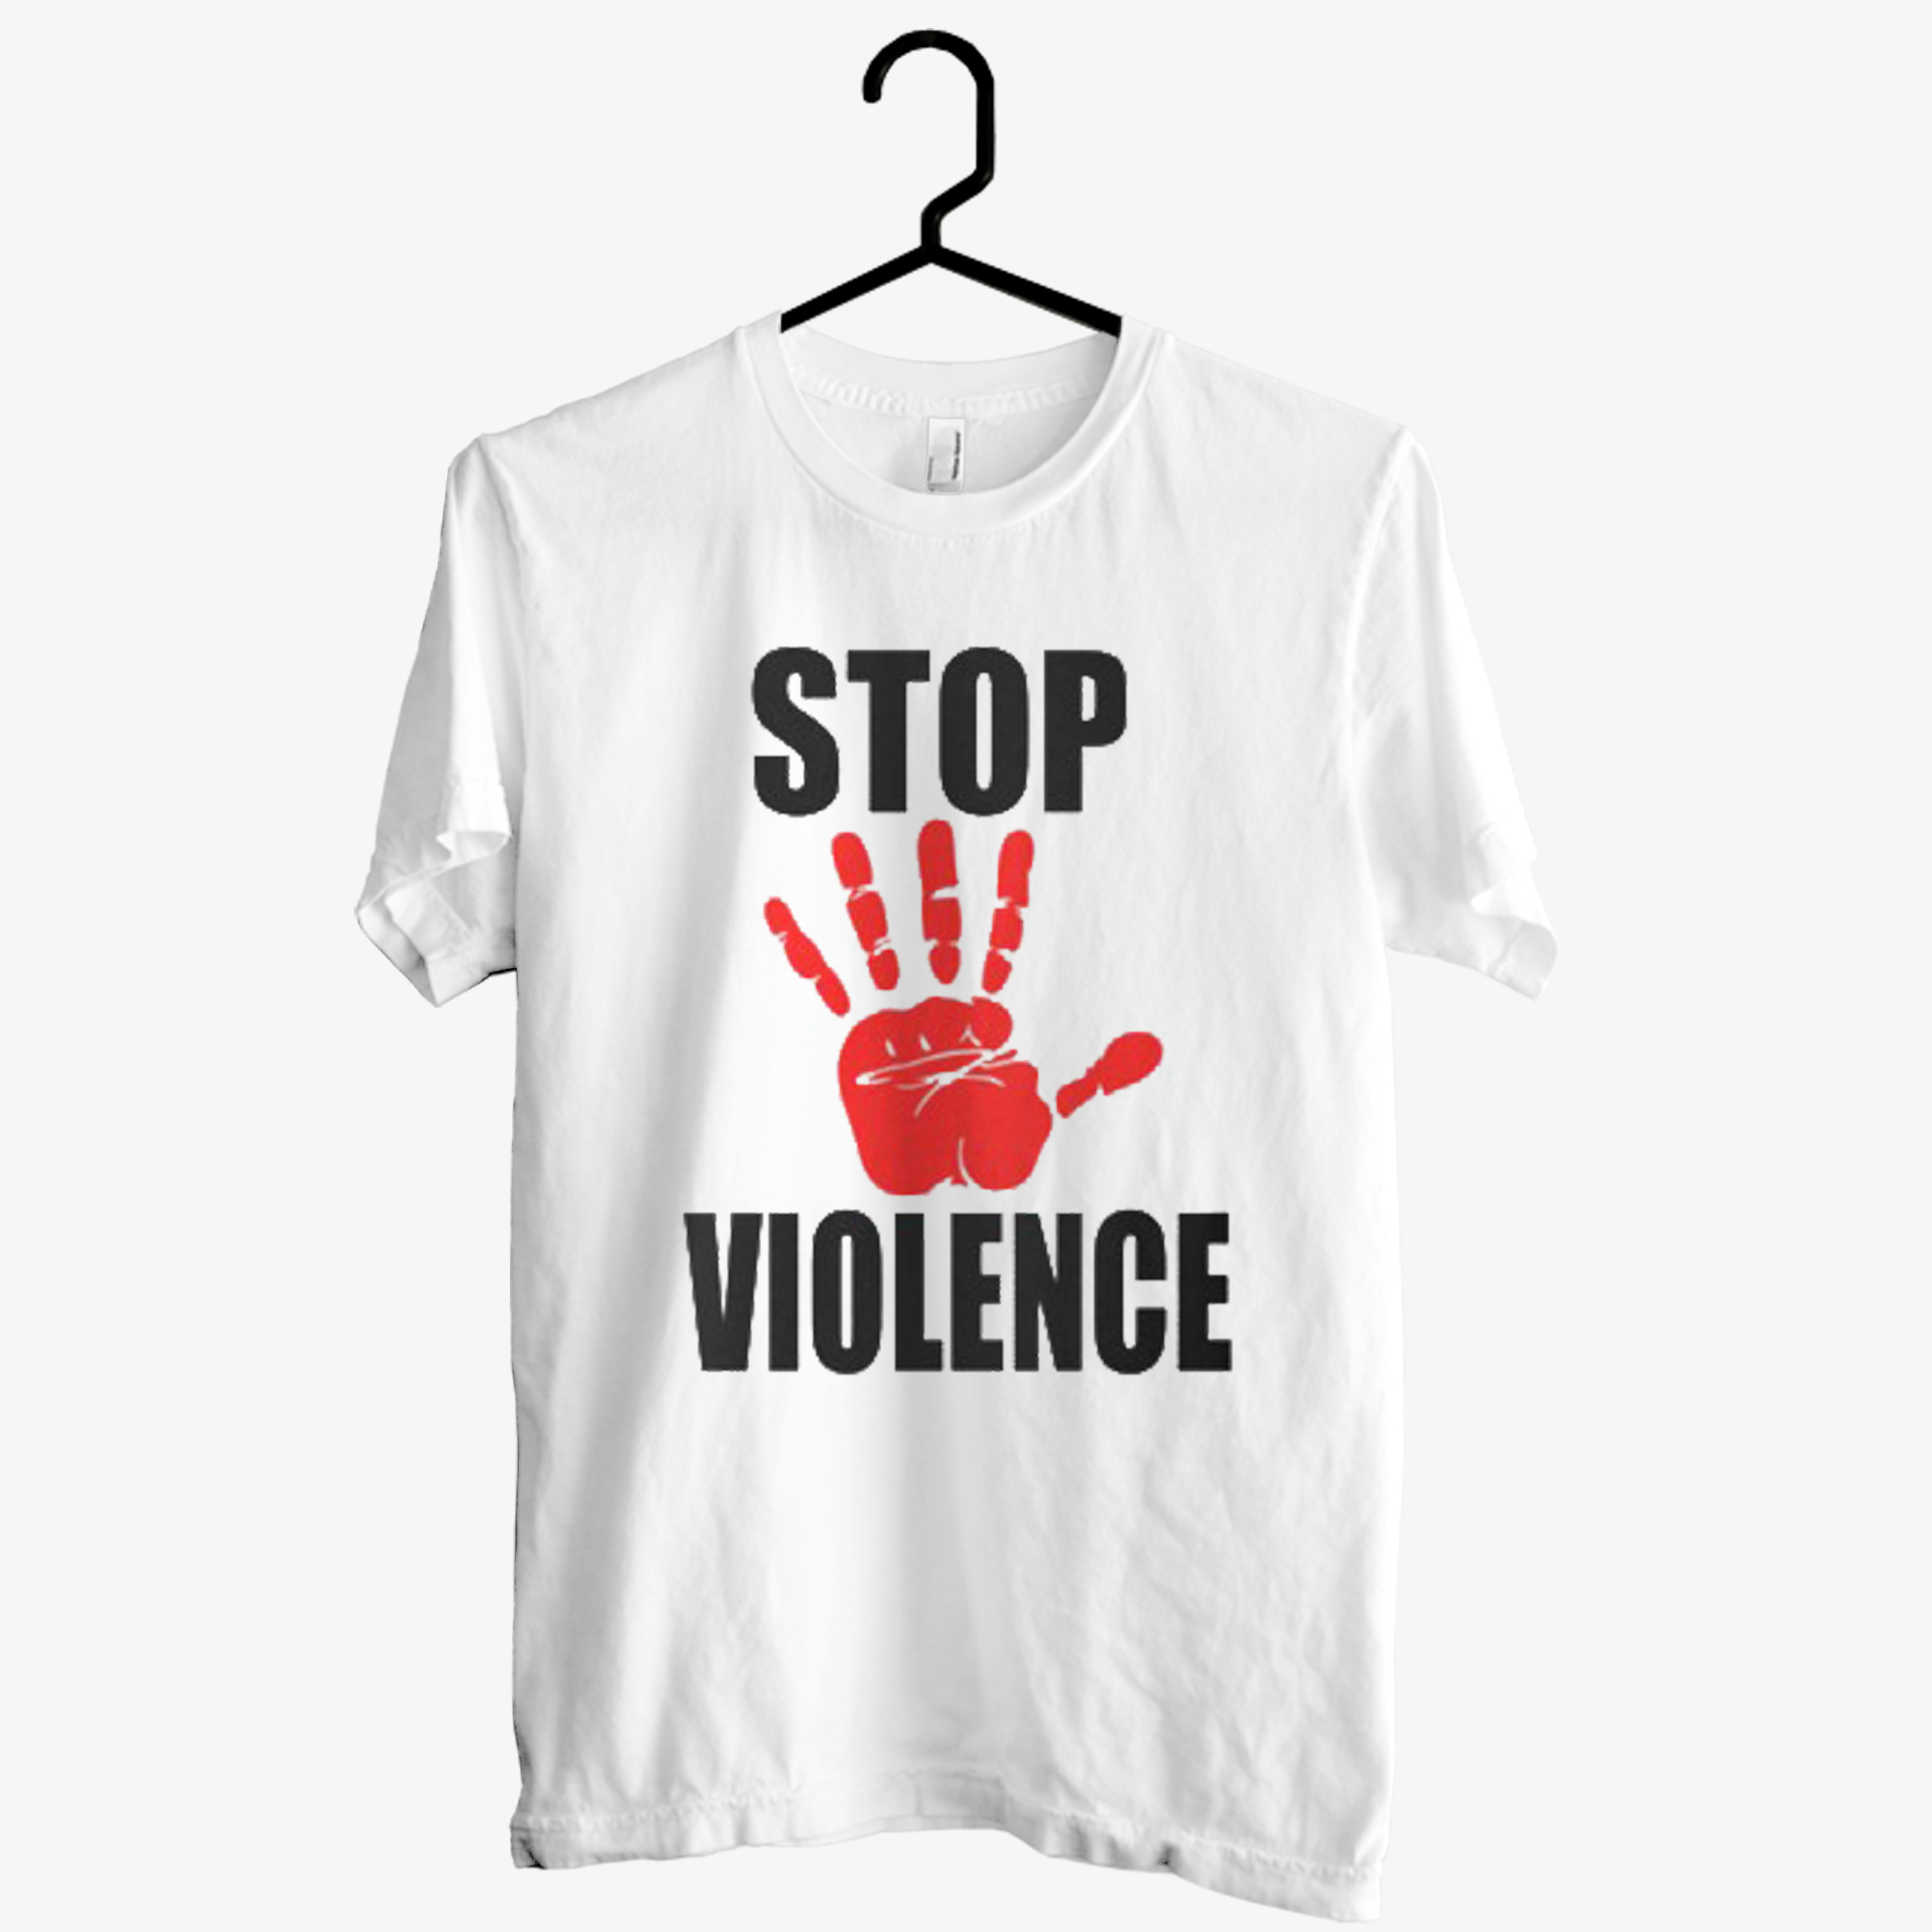 'International Day of Non Violence T shirt